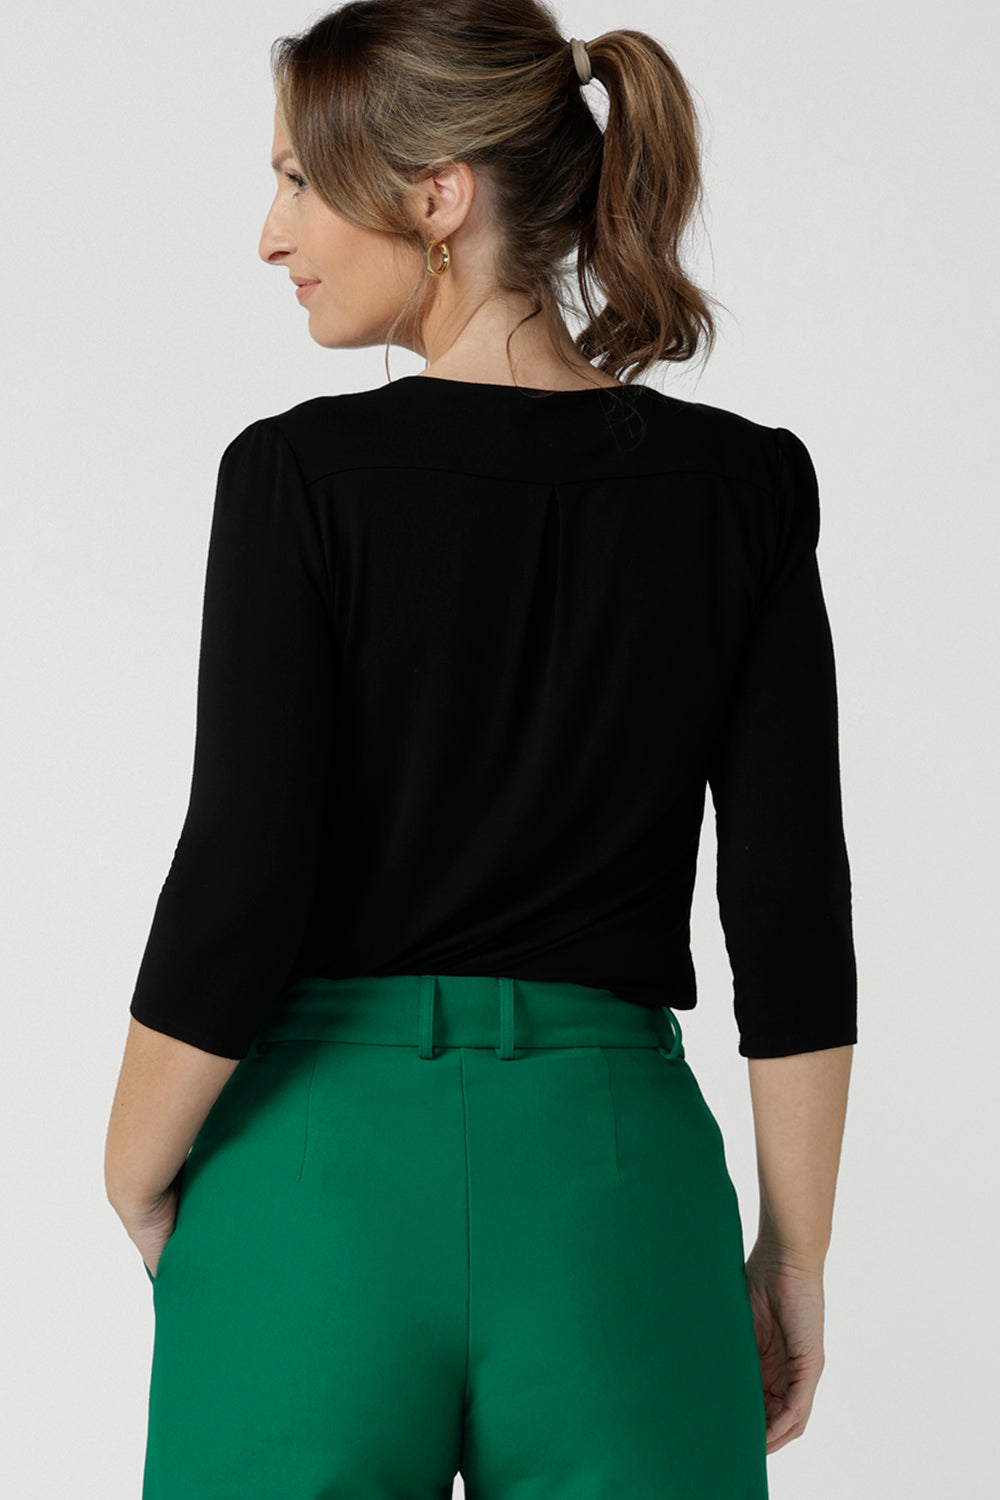 Back view of an elegant top for work and casual wear, this scoop neck, 3/4 sleeve top in black bamboo jersey is made in Australia by Australian and New Zealand women's clothing brand, Leina & Fleur. Shop comfortable work tops online in petite, mid size and plus sizes.